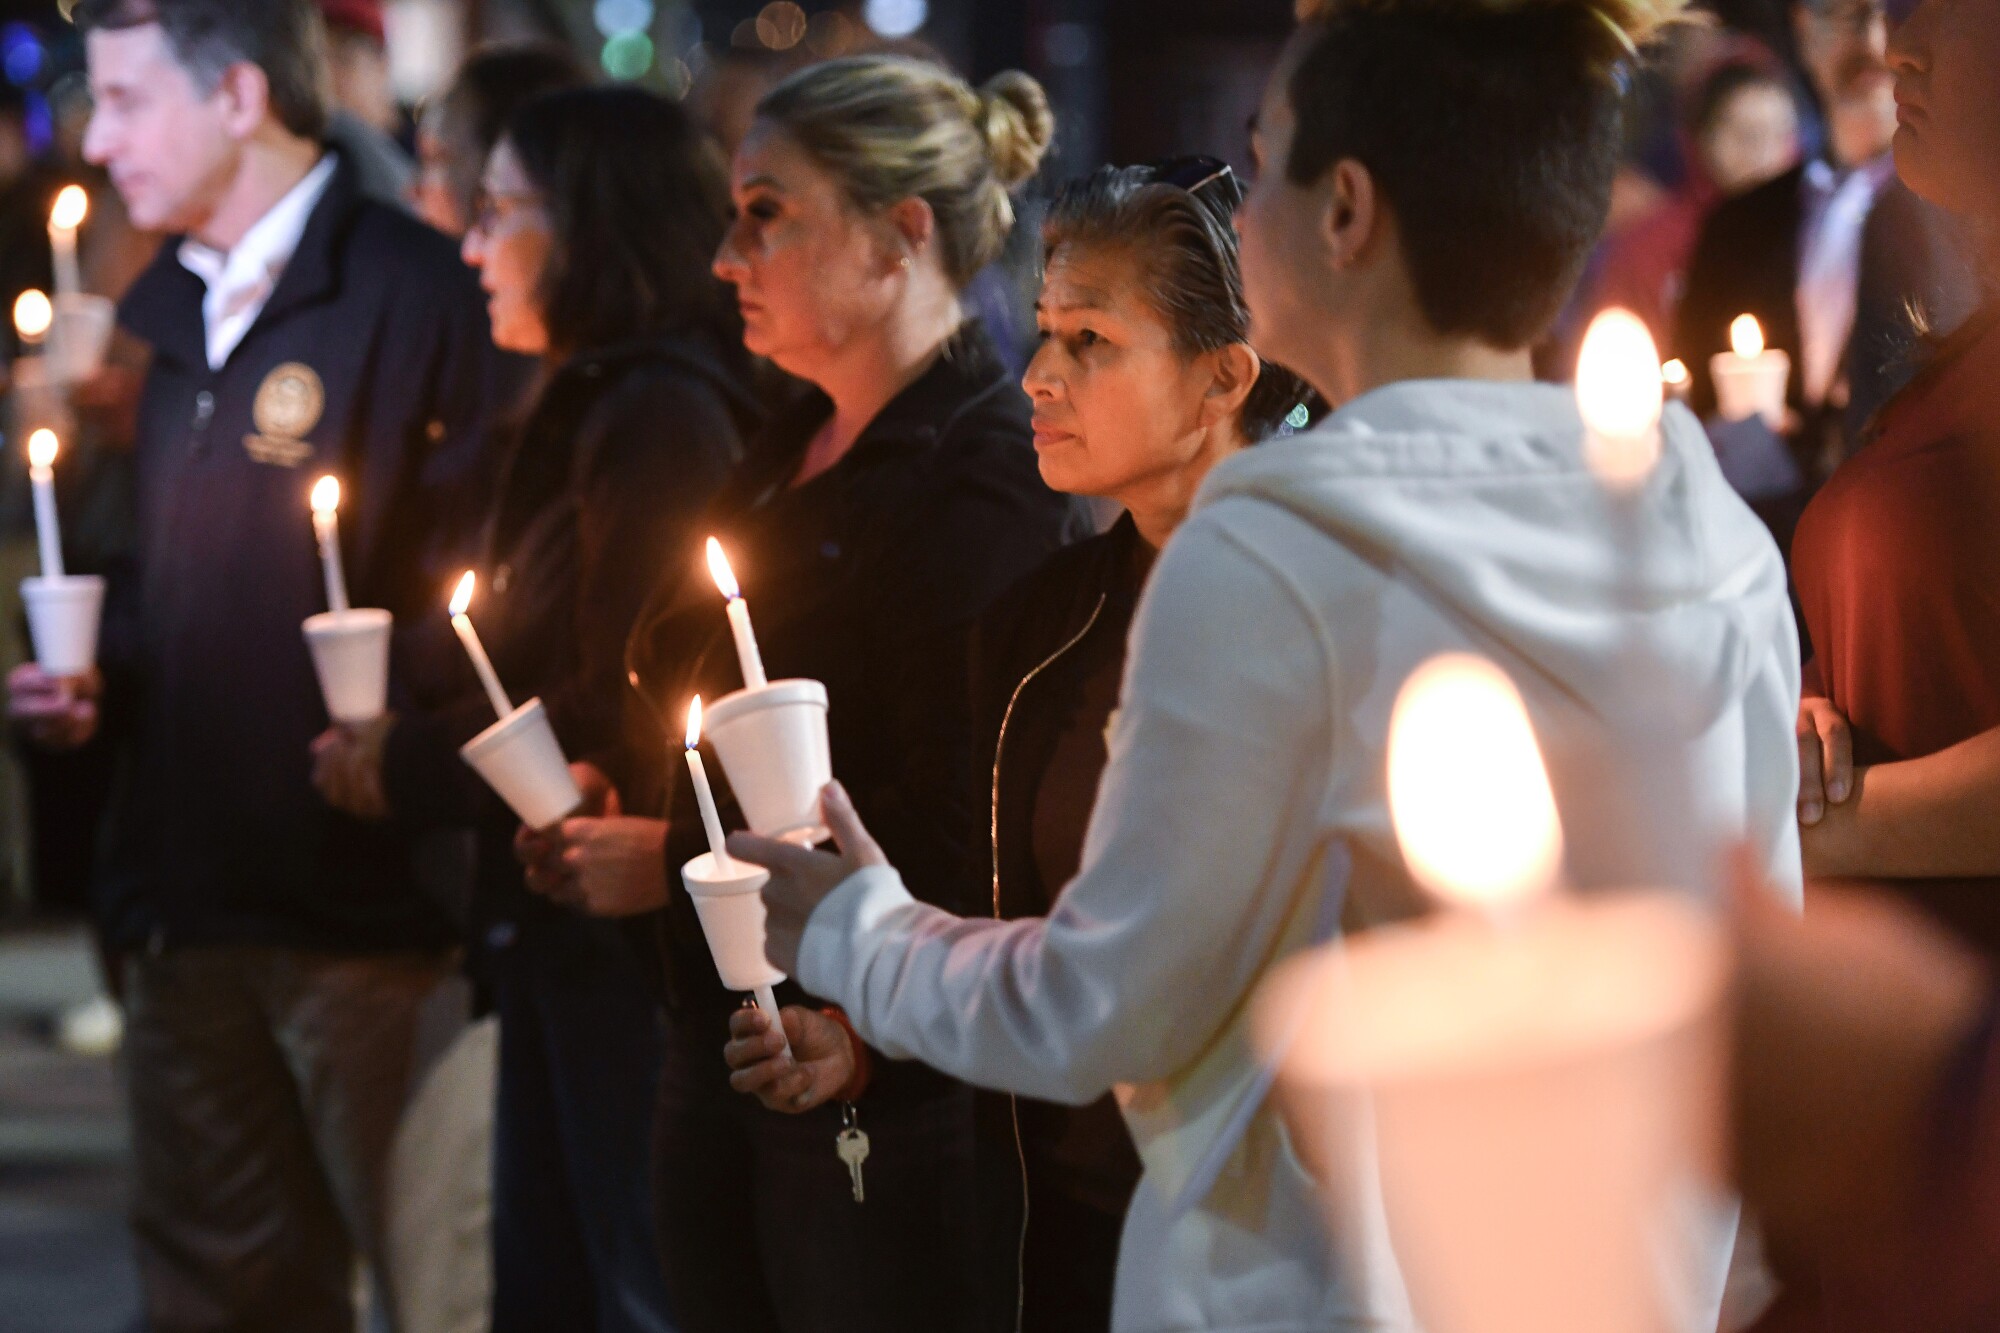 People attend a candlelight vigil for victims of a fatal shooting